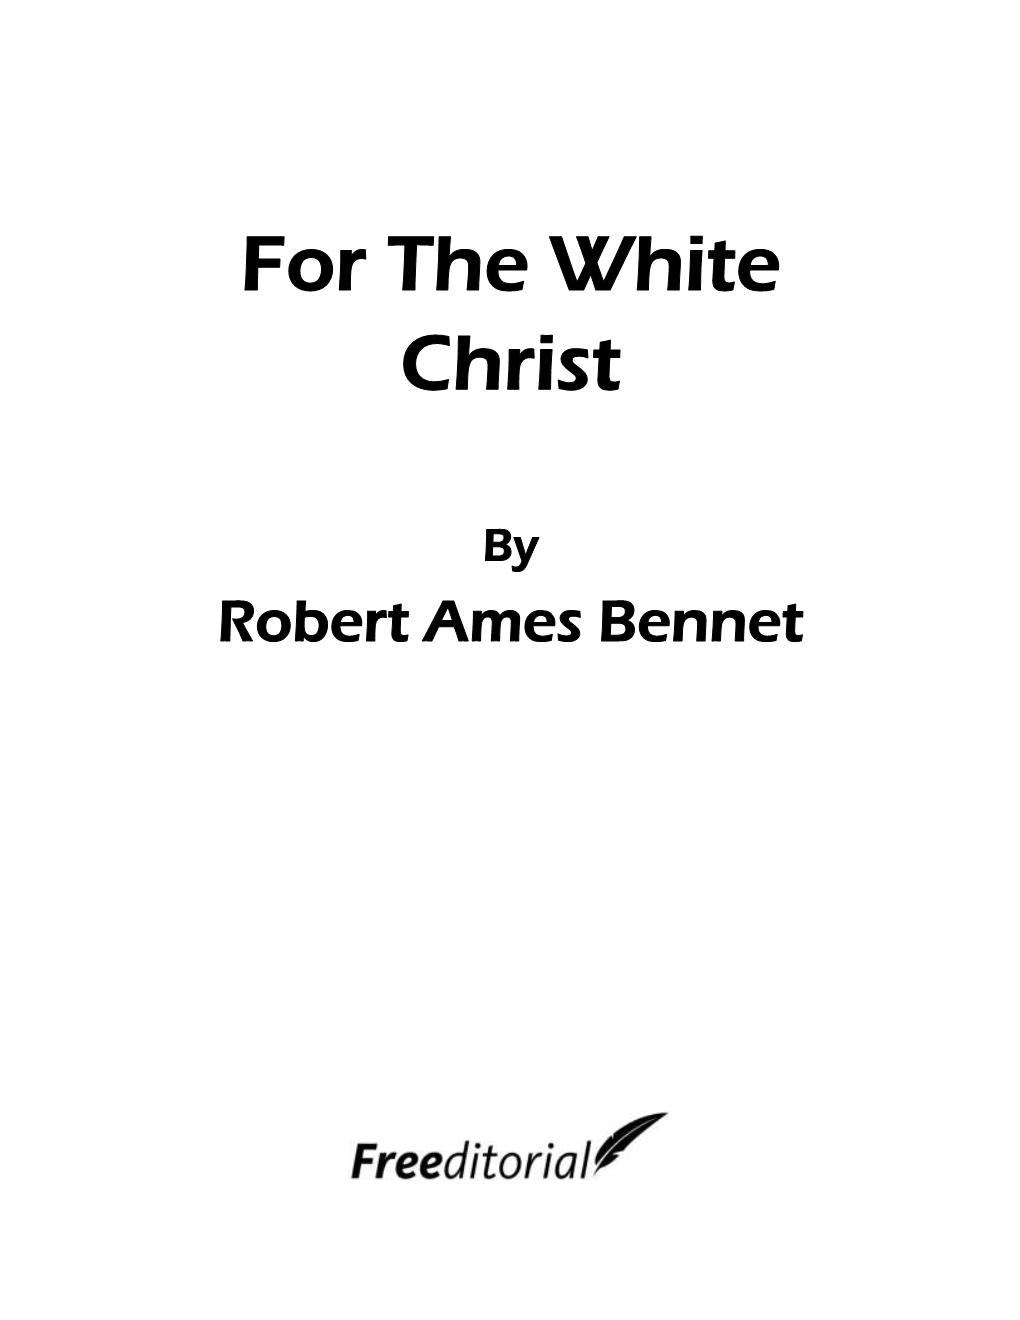 For the White Christ